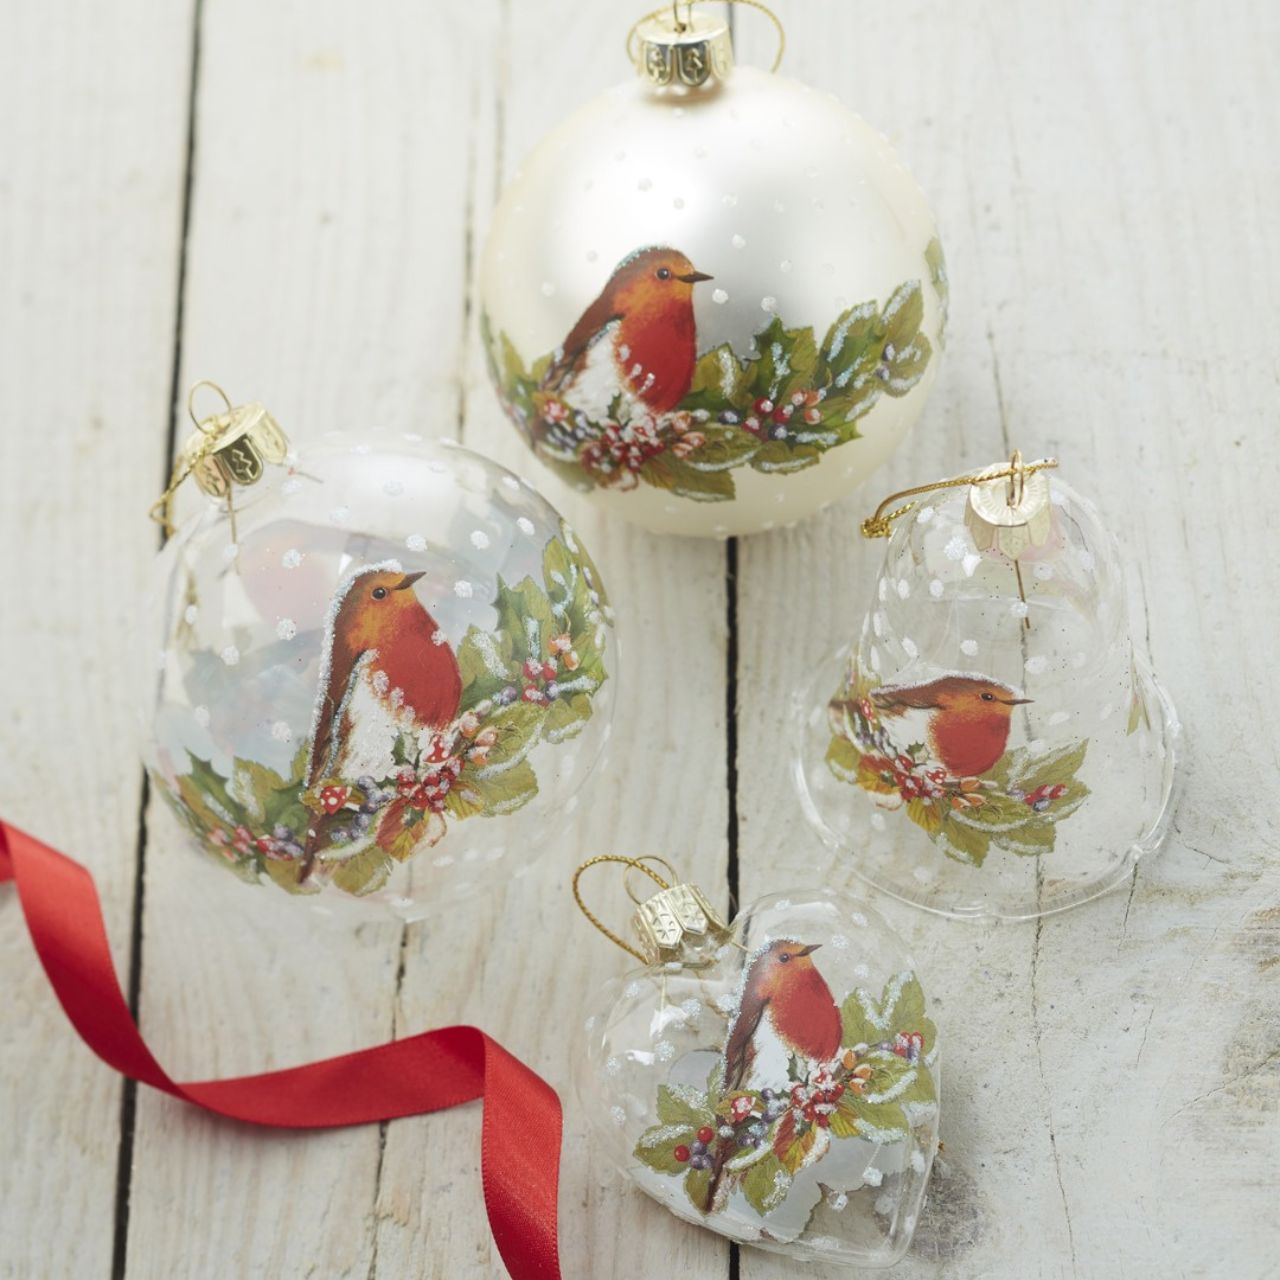 Gisela Graham Heart-Shaped Bauble with Robin Christmas Decoration  This unique heart-shaped Gisela Graham bauble is decorated with a Robin Christmas decoration, adding a whimsical touch to your holiday tree. Crafted with glass, it is sure to be a treasured family heirloom.